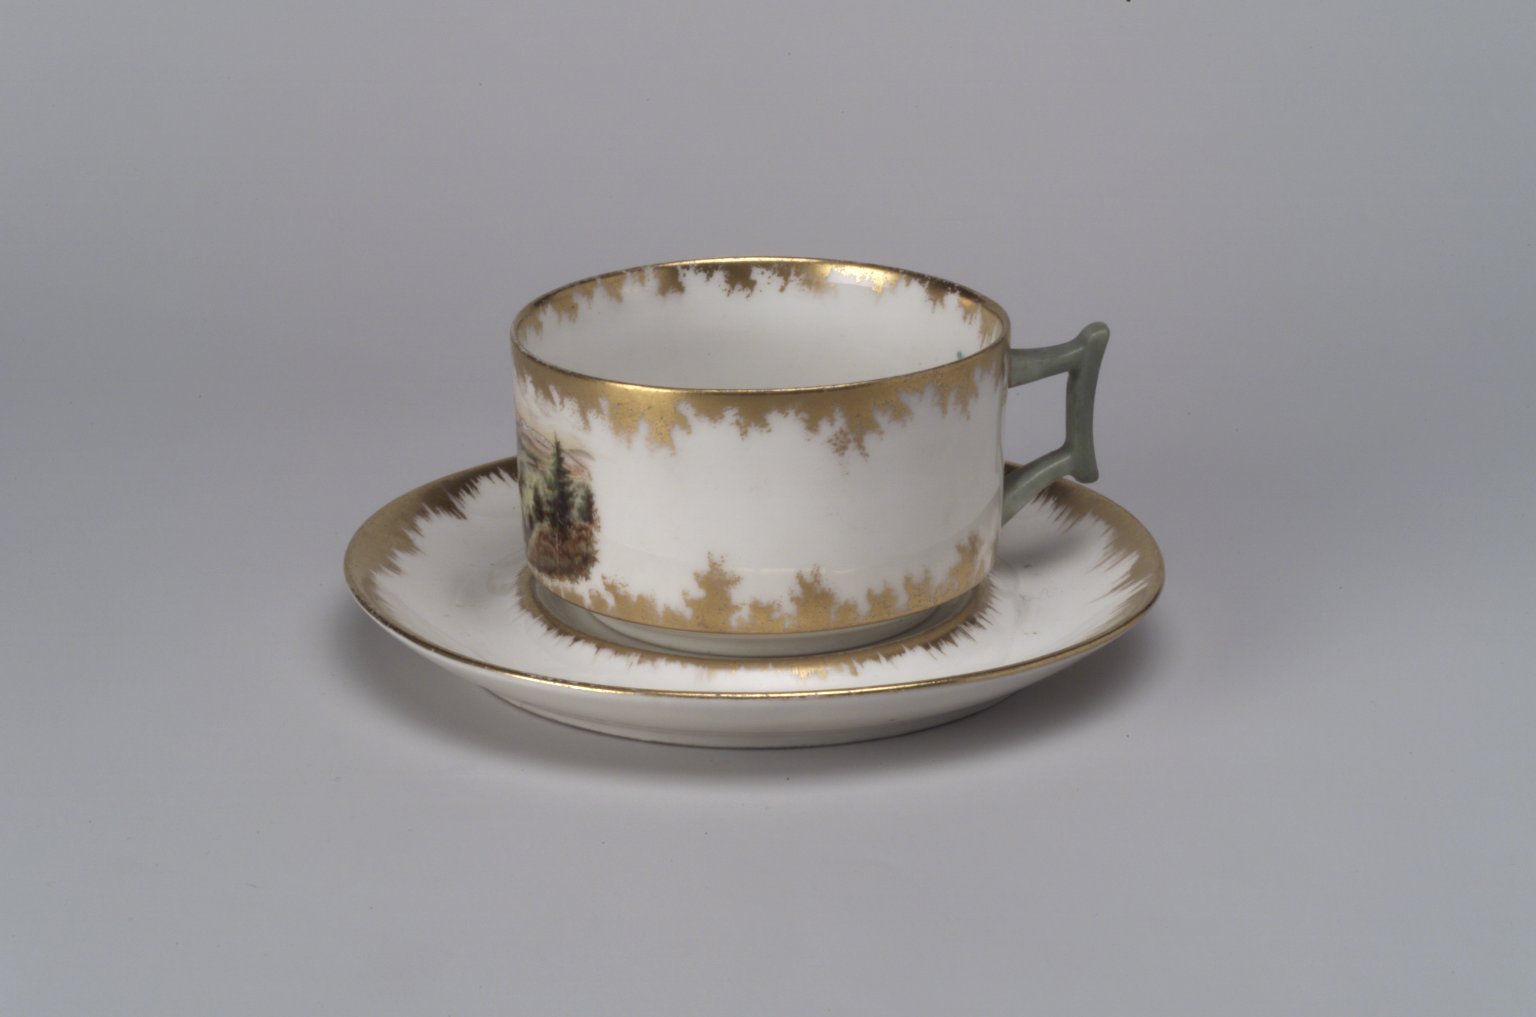 Tea Cups and Saucer -  Canada